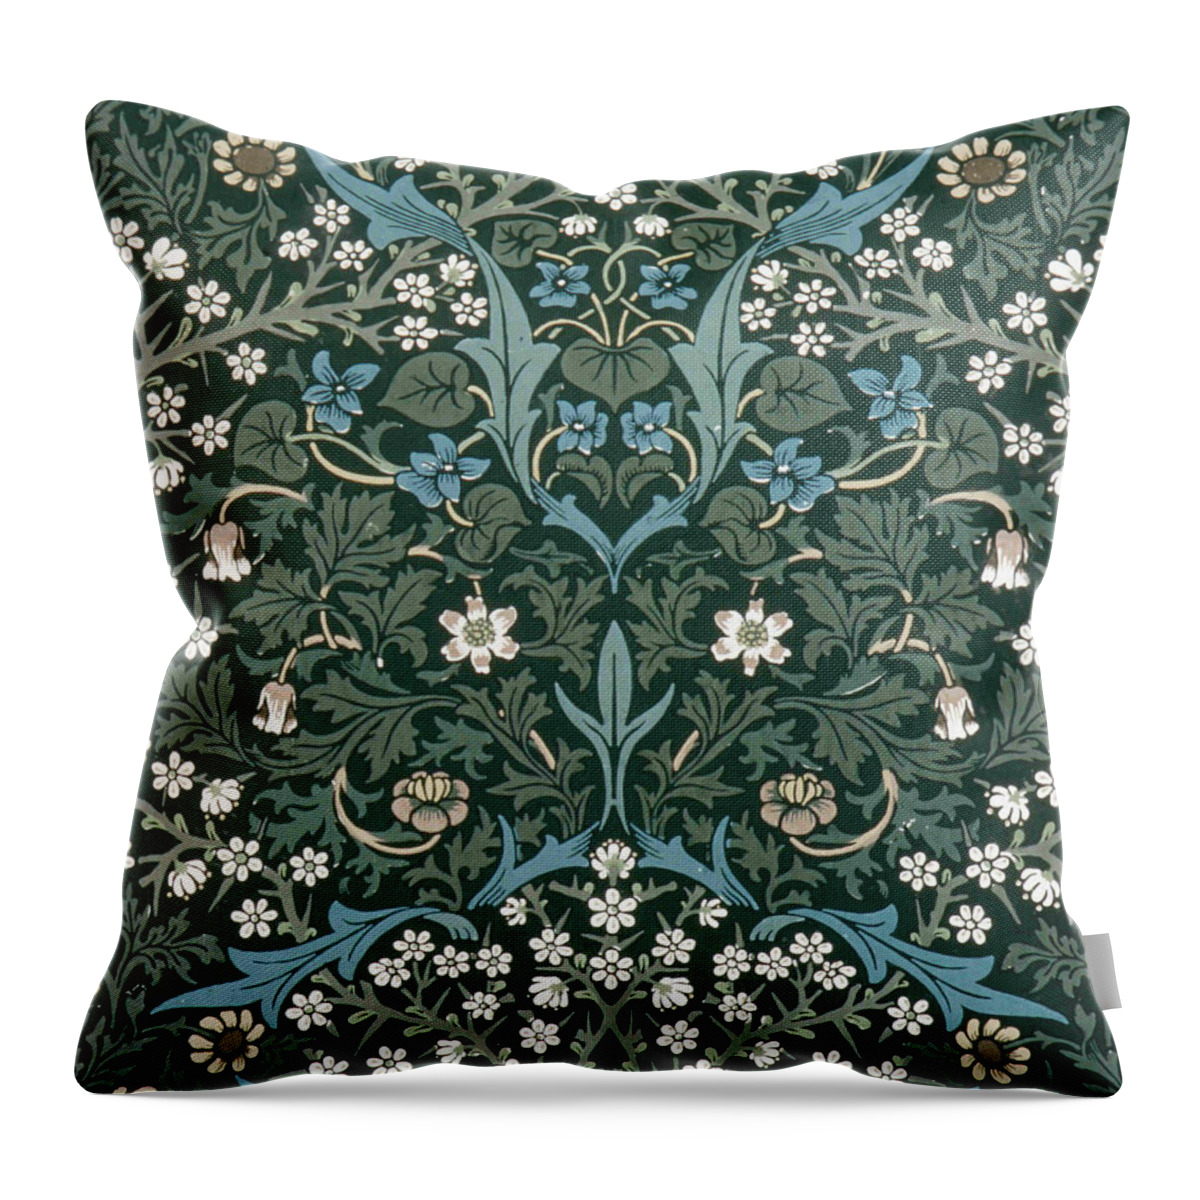 William Throw Pillow featuring the digital art Blue and White Flowers on Green by Philip Ralley